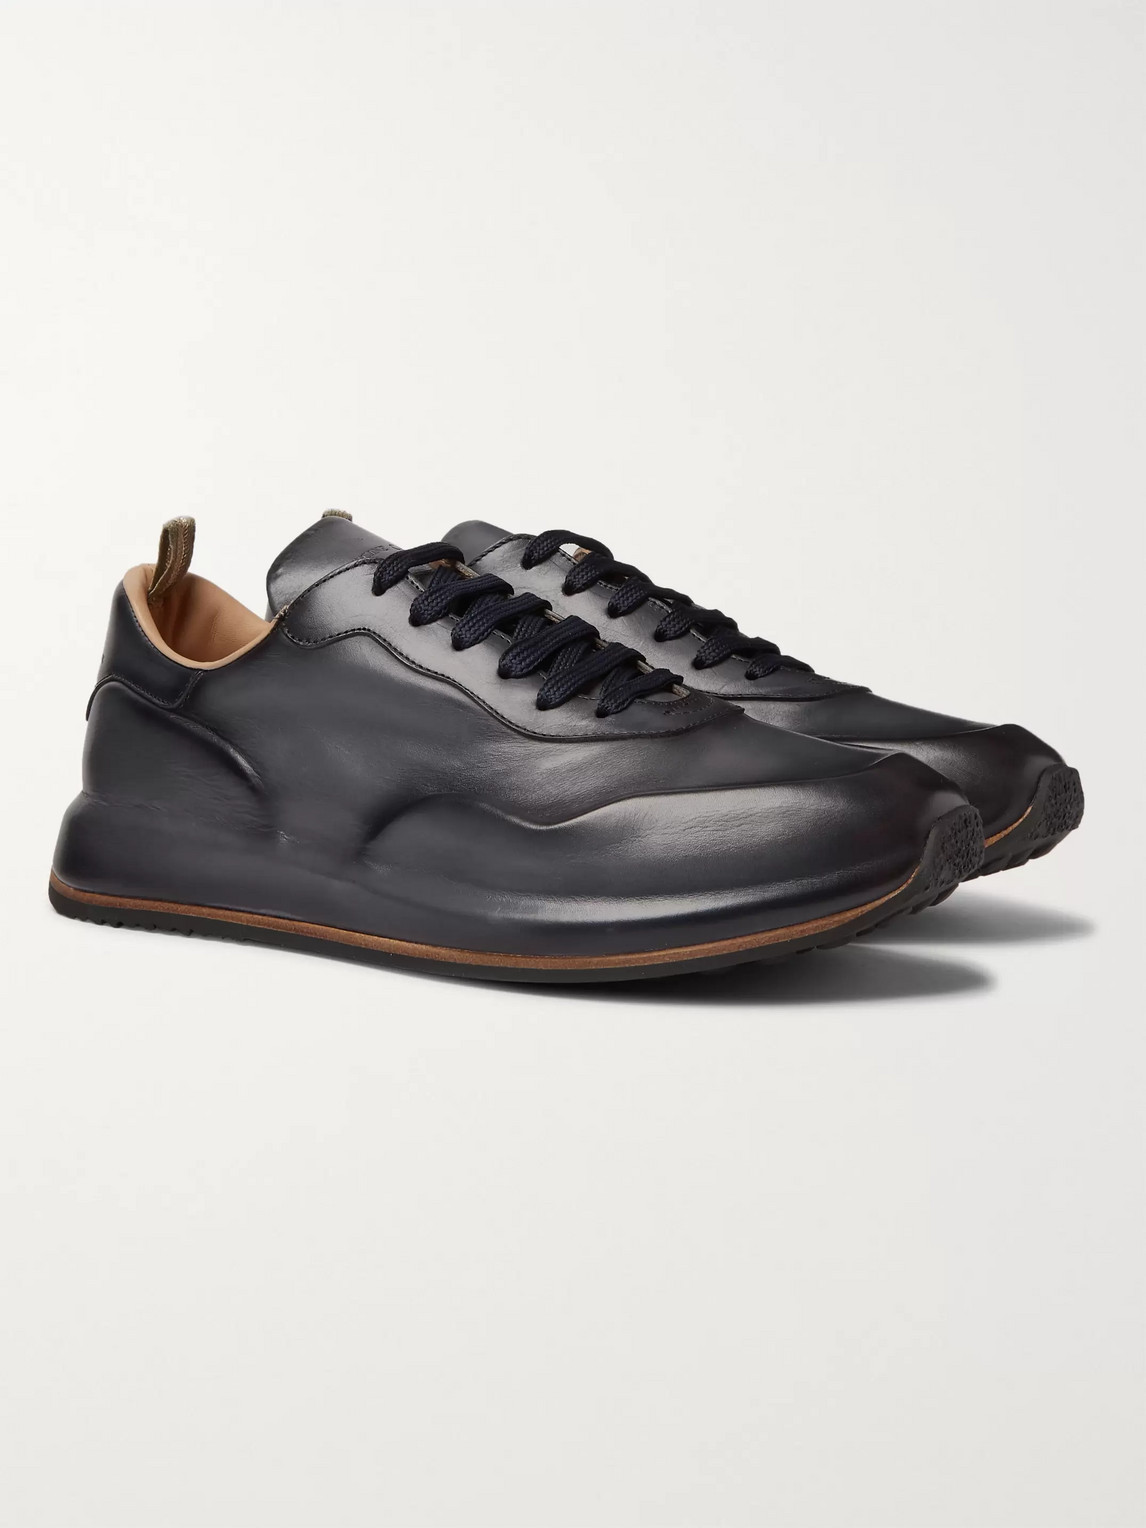 OFFICINE CREATIVE RACE LUX LEATHER SNEAKERS